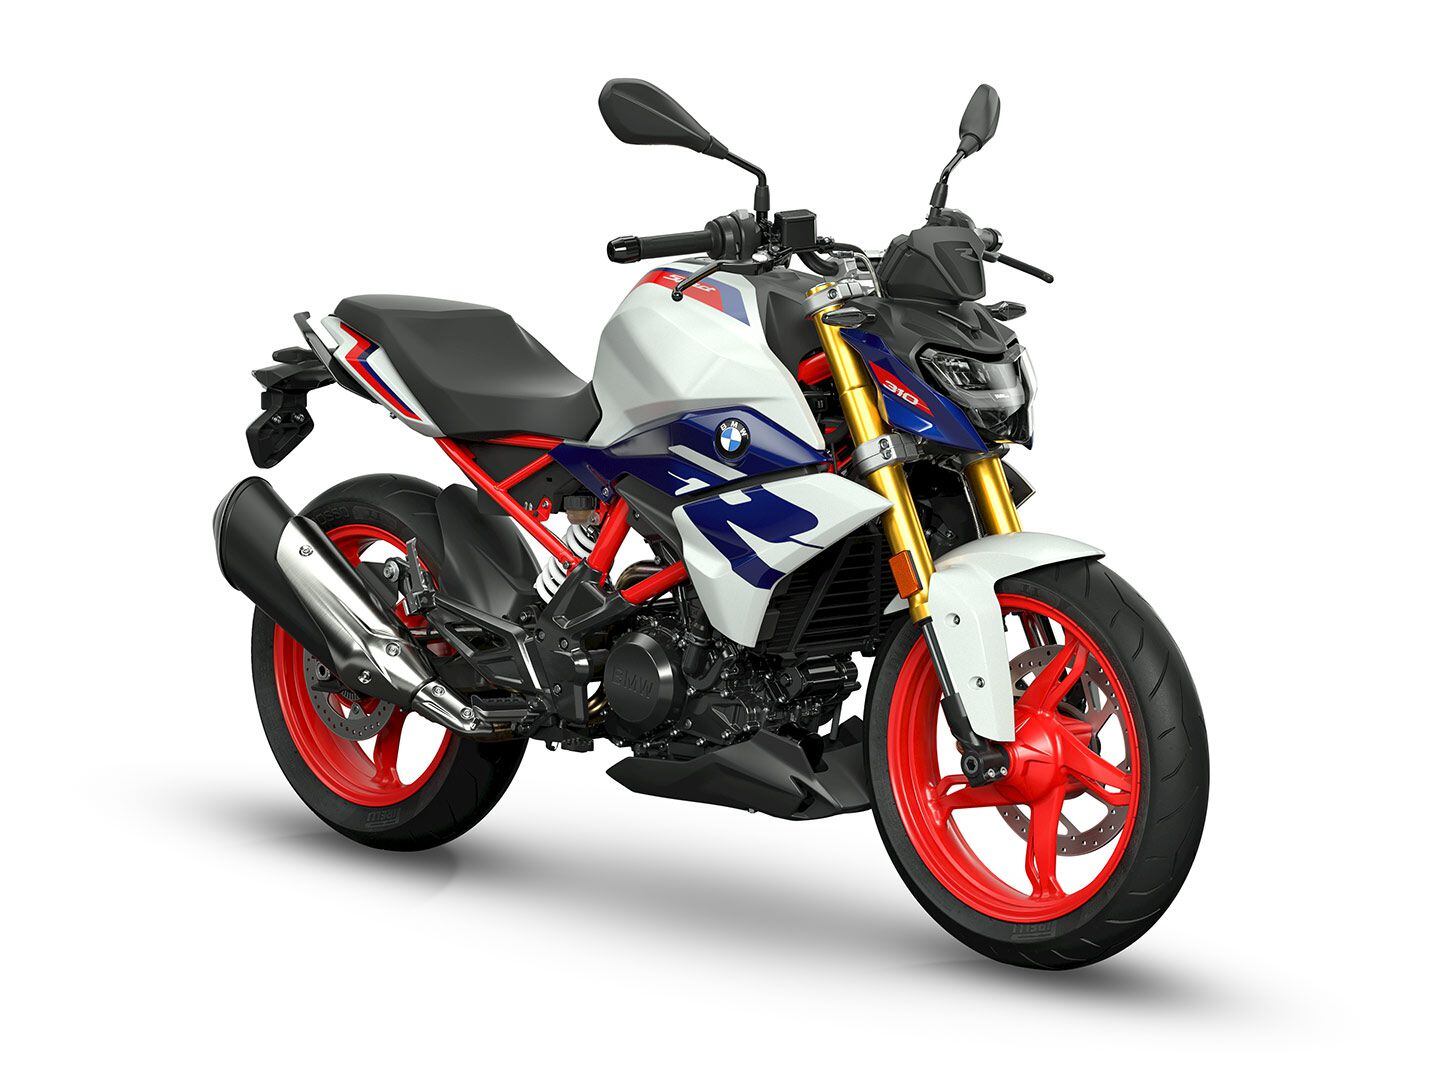 BMW single-cylinder models such as the G 310 R roadster appear slated to get ShiftCam variable valve timing and lift.